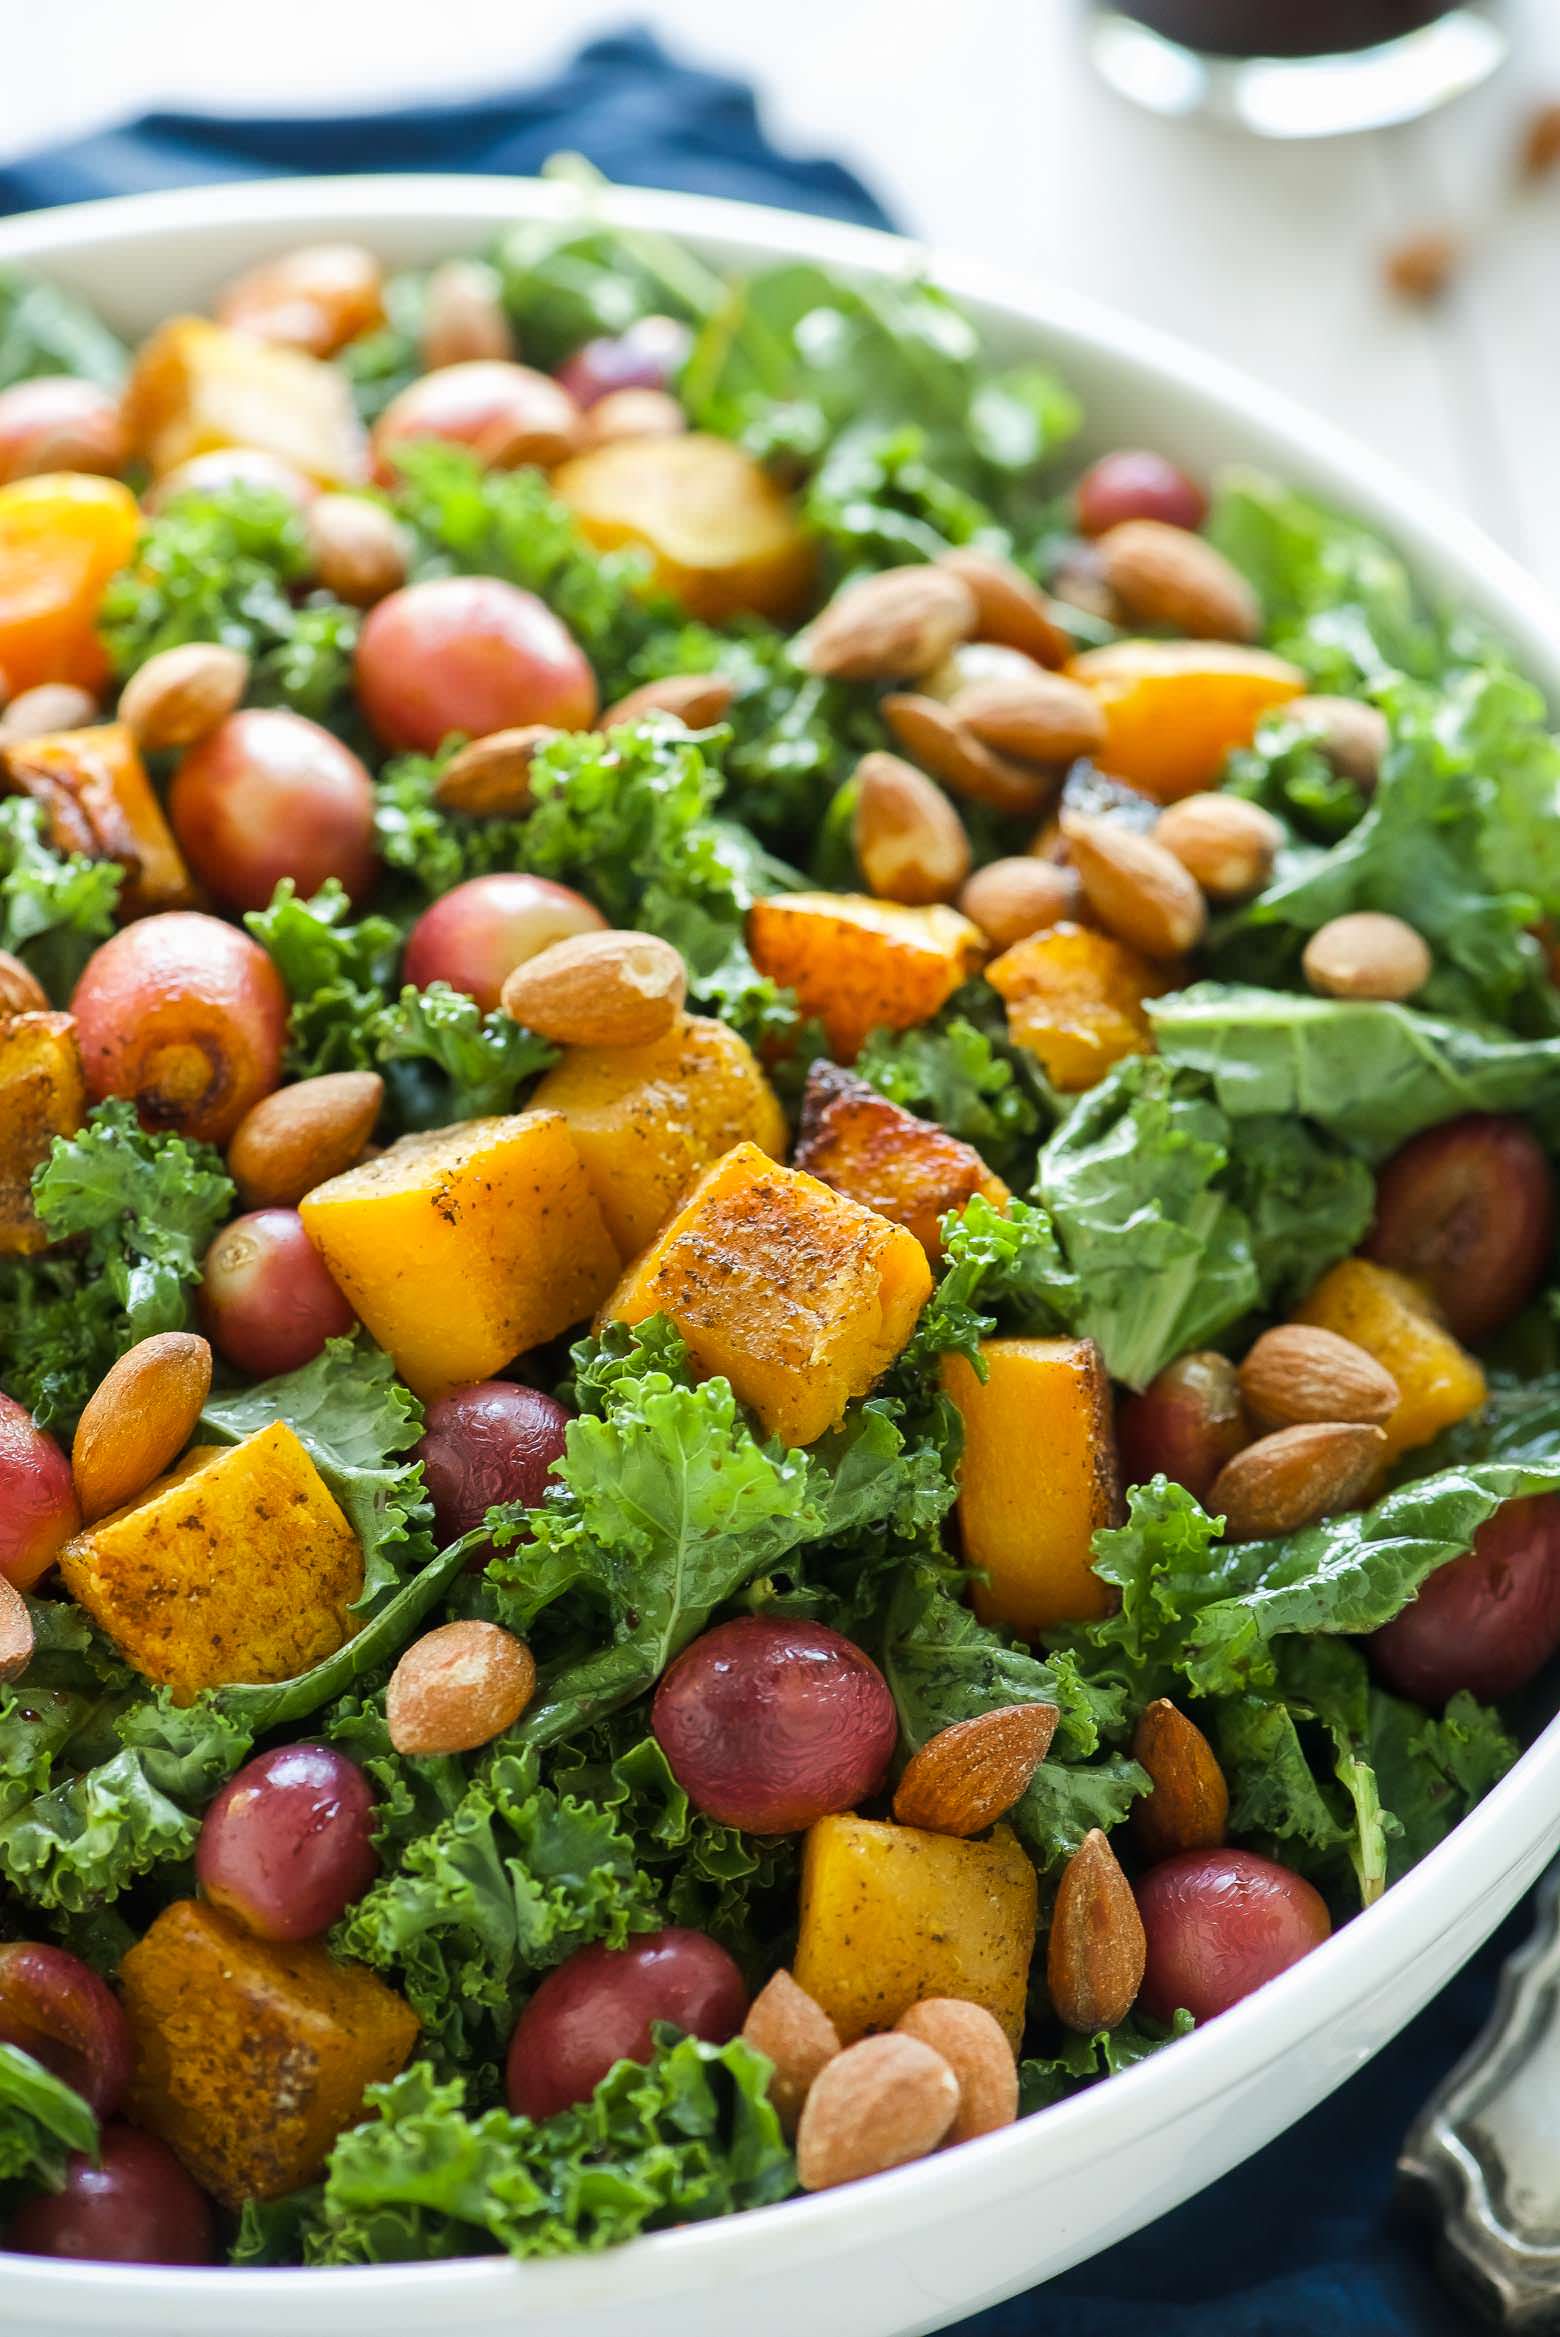 Massaged Kale Salad with Butternut Squash and Roasted Grapes is fall in a dish! It is healthy, simple and perfect for make-ahead lunches! Caramelized butternut squash and roasted grapes mix with balsamic massaged kale for a paleo and vegan friendly salad!